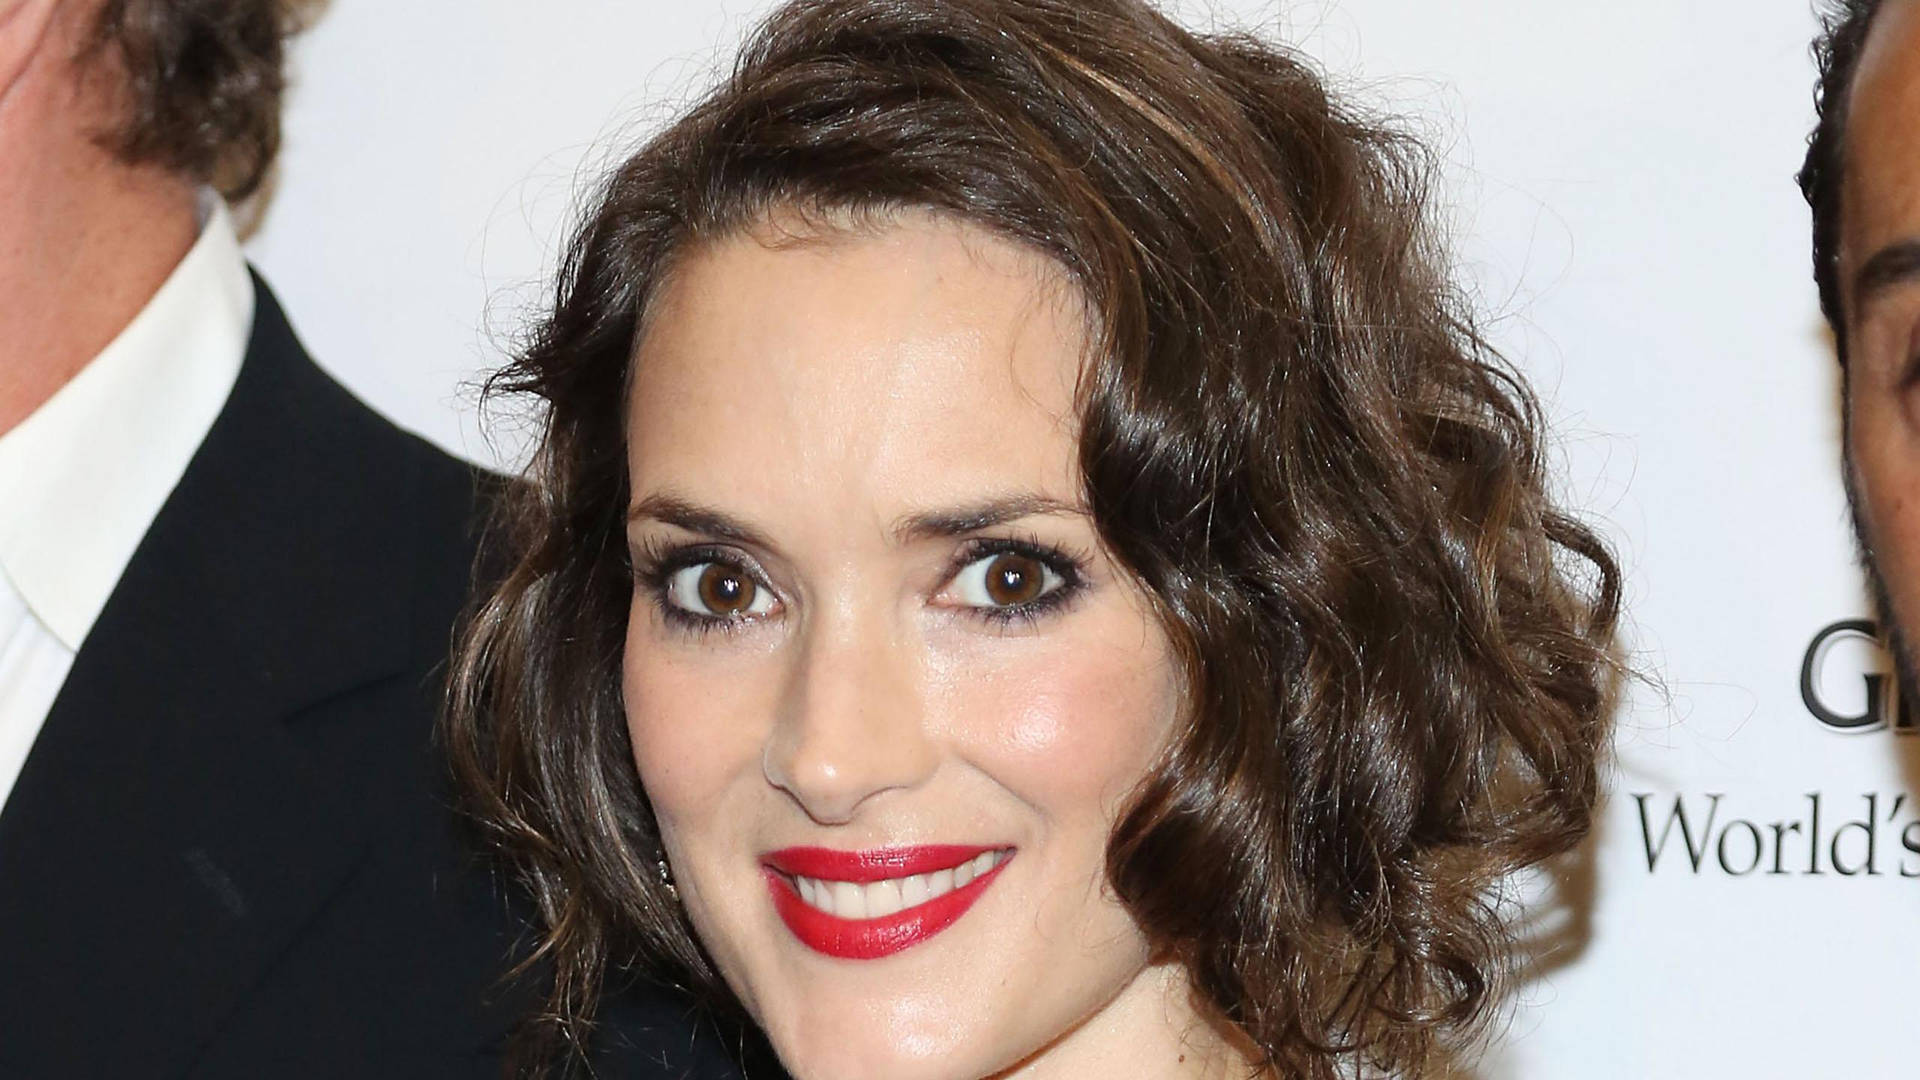 Stunning Winona Ryder sporting red lipstick and a curly short hairdo Wallpaper